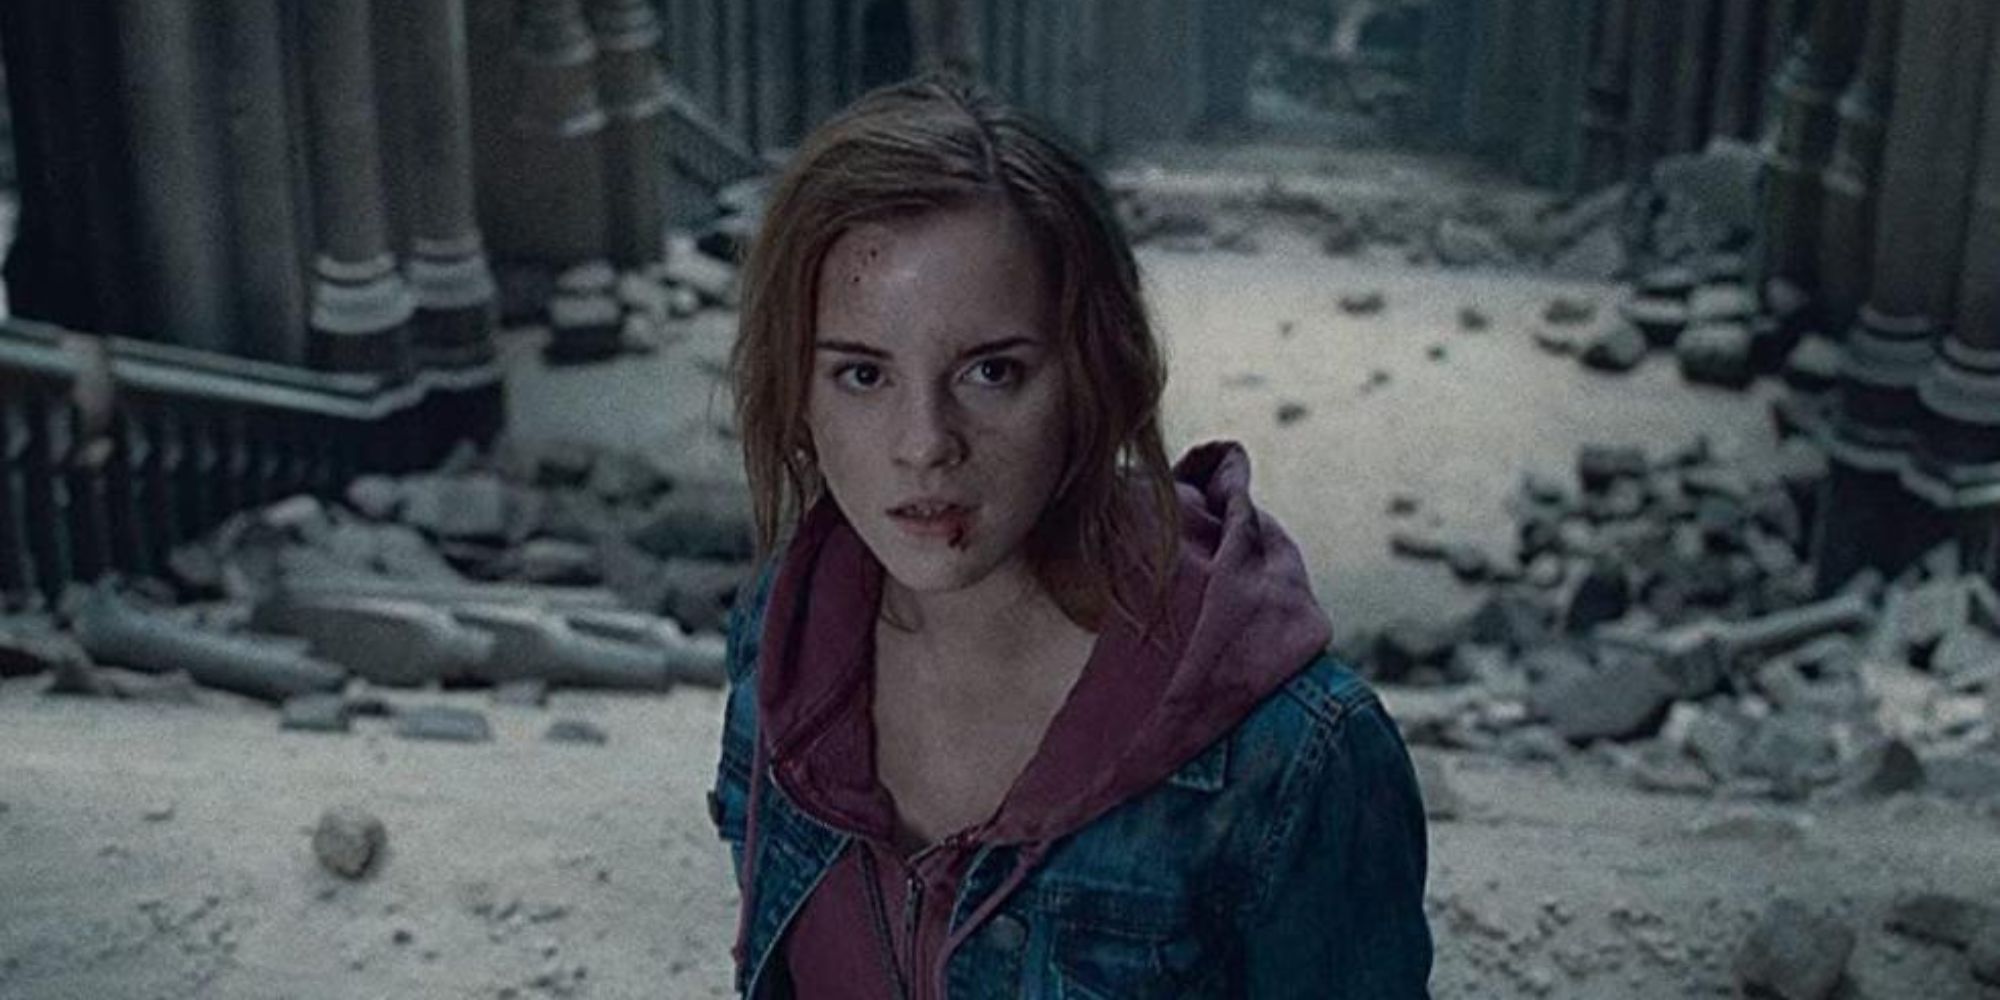 Hermione Granger in the Battle of Hogwarts in Harry Potter and the Deathly Hallows Pt. 2